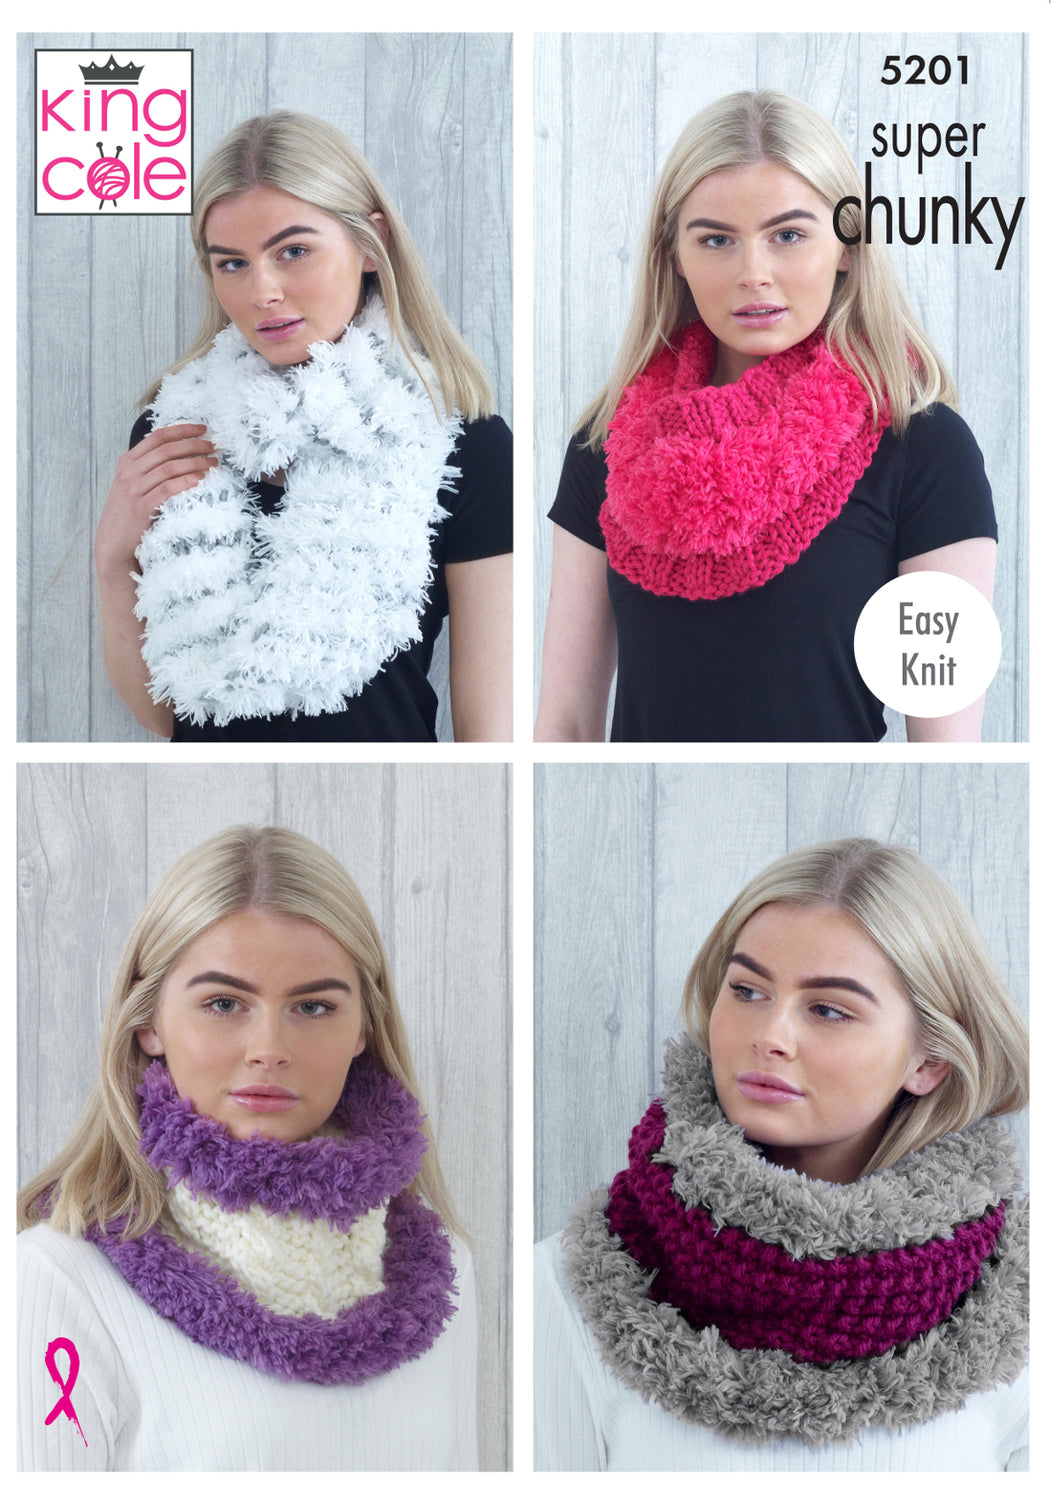 http://images.esellerpro.com/2278/I/150/445/king-cole-super-chunky-knitting-pattern-ladies-womens-easy-knit-cowls-5201.jpg